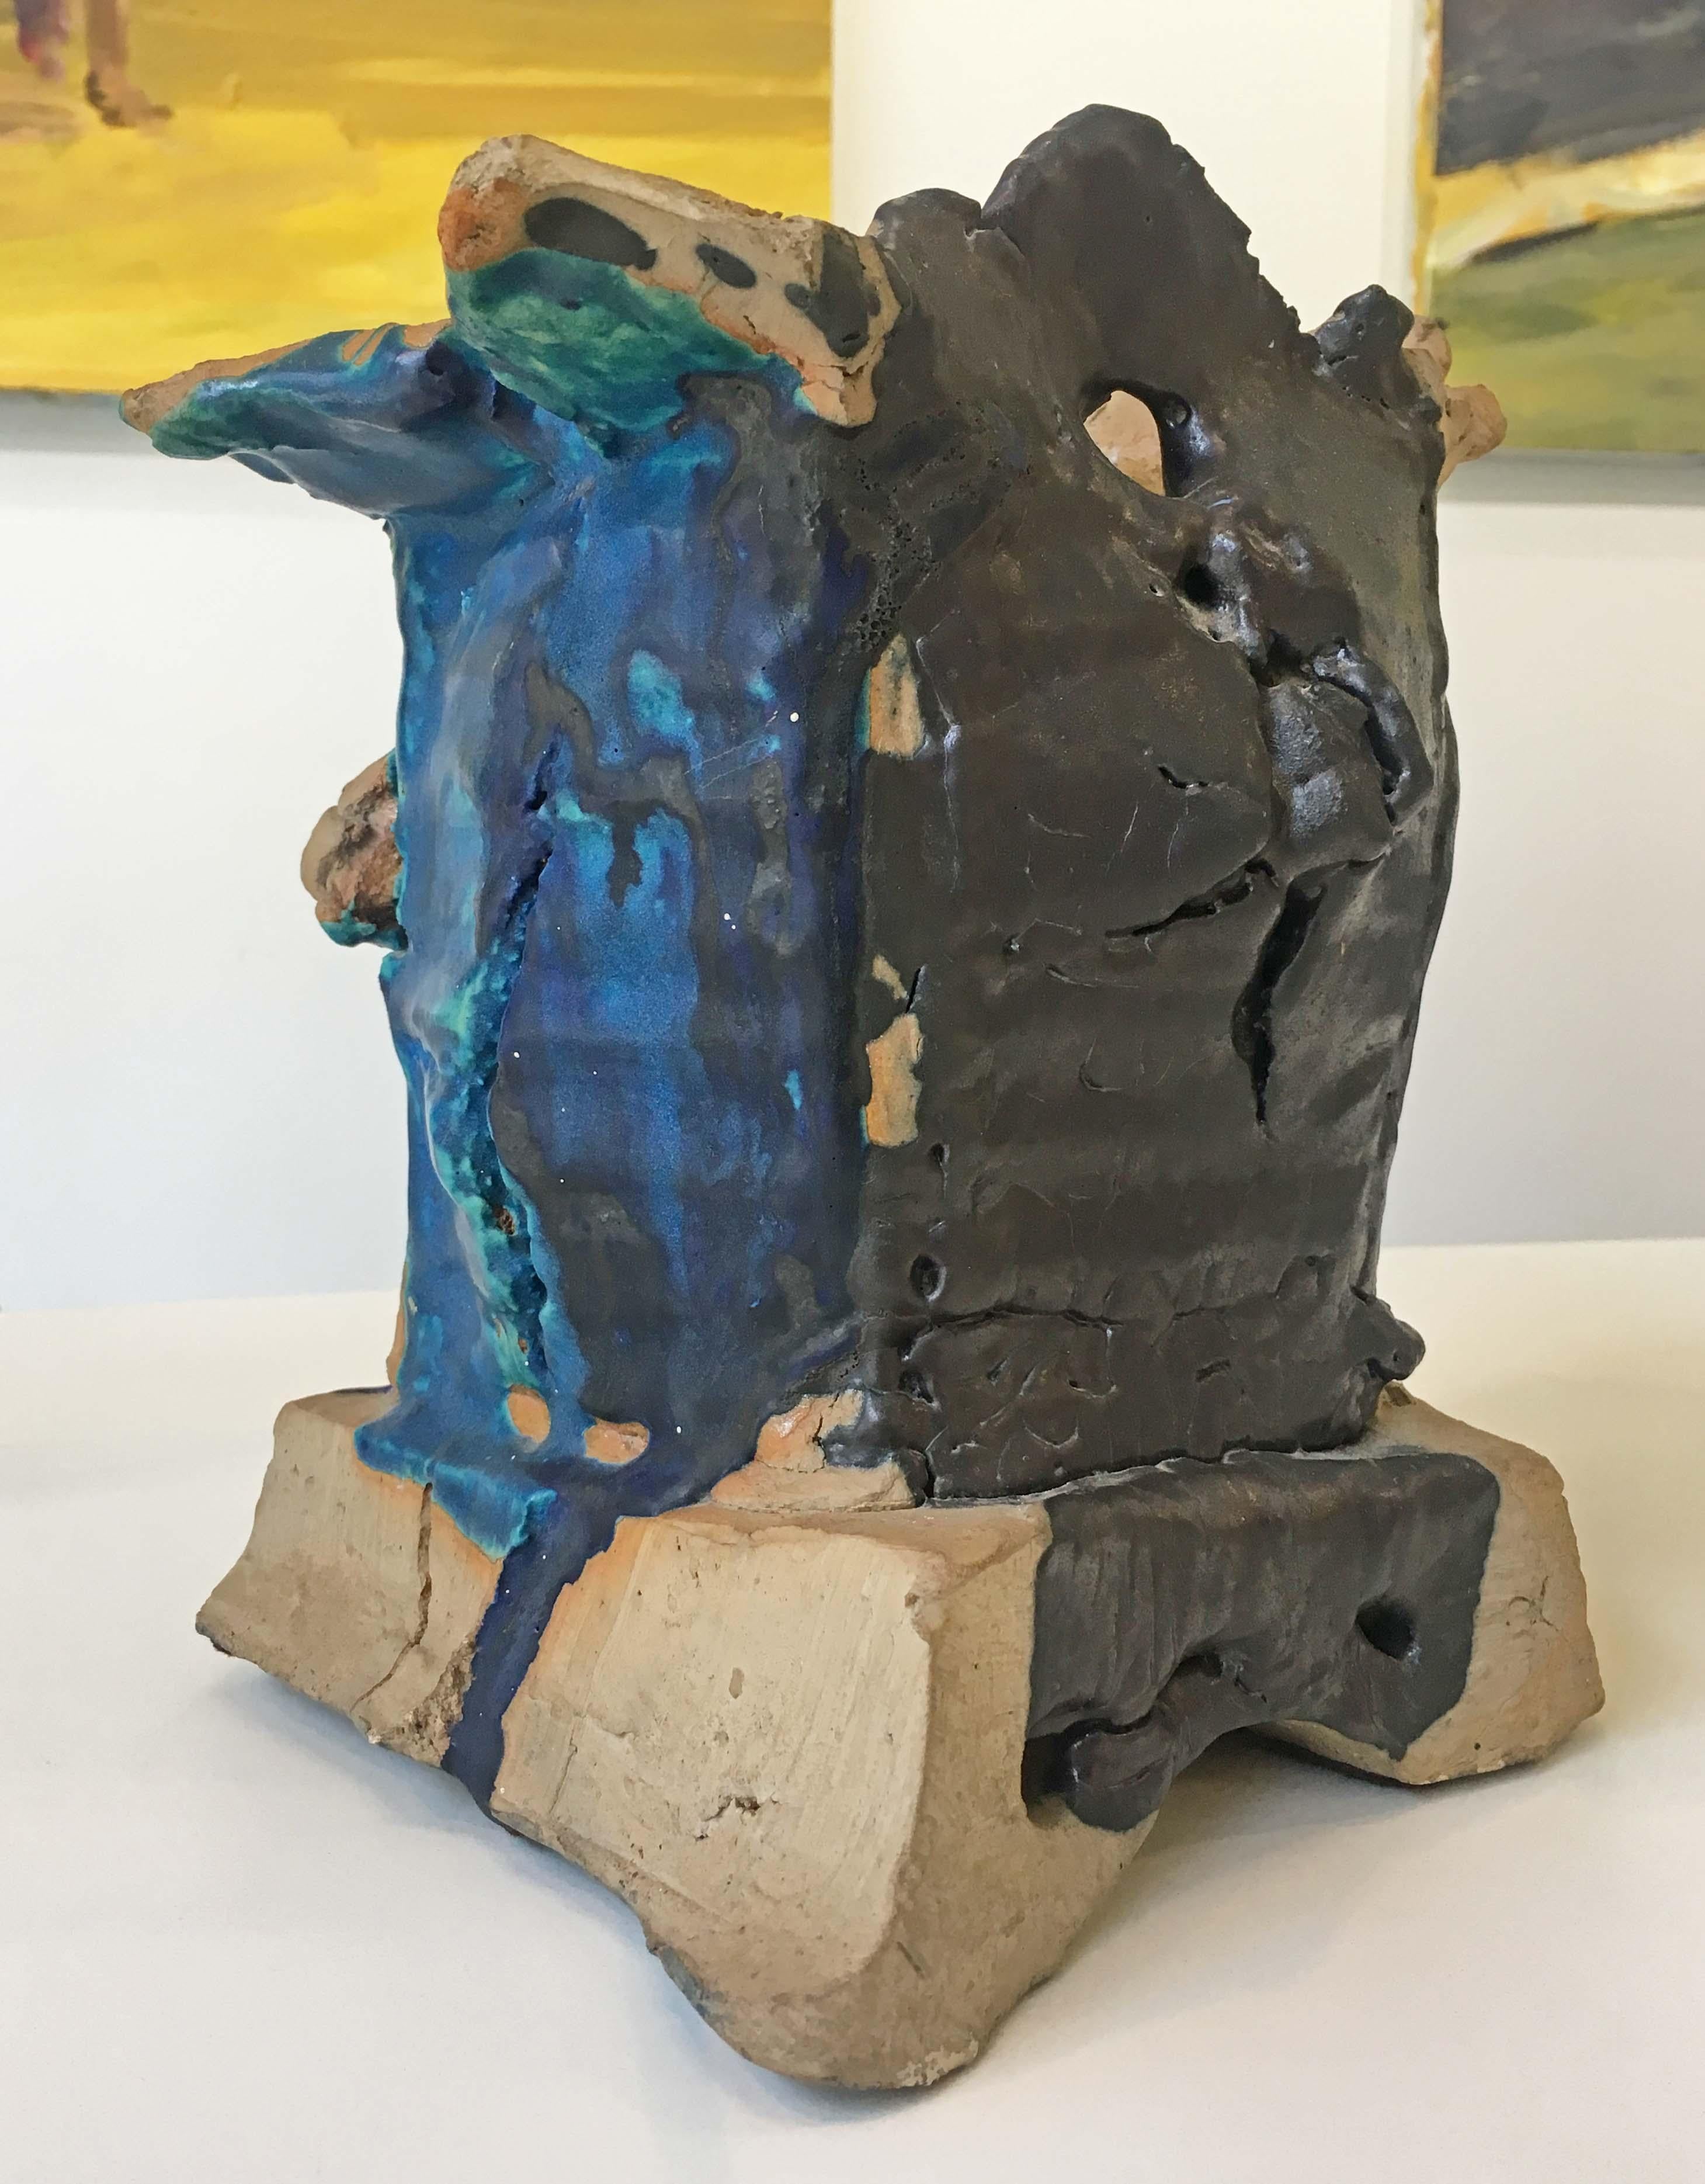 Untitled Vessel (Ceramic with Multicolor Glaze) - Abstract Expressionist Sculpture by Peter Voulkos